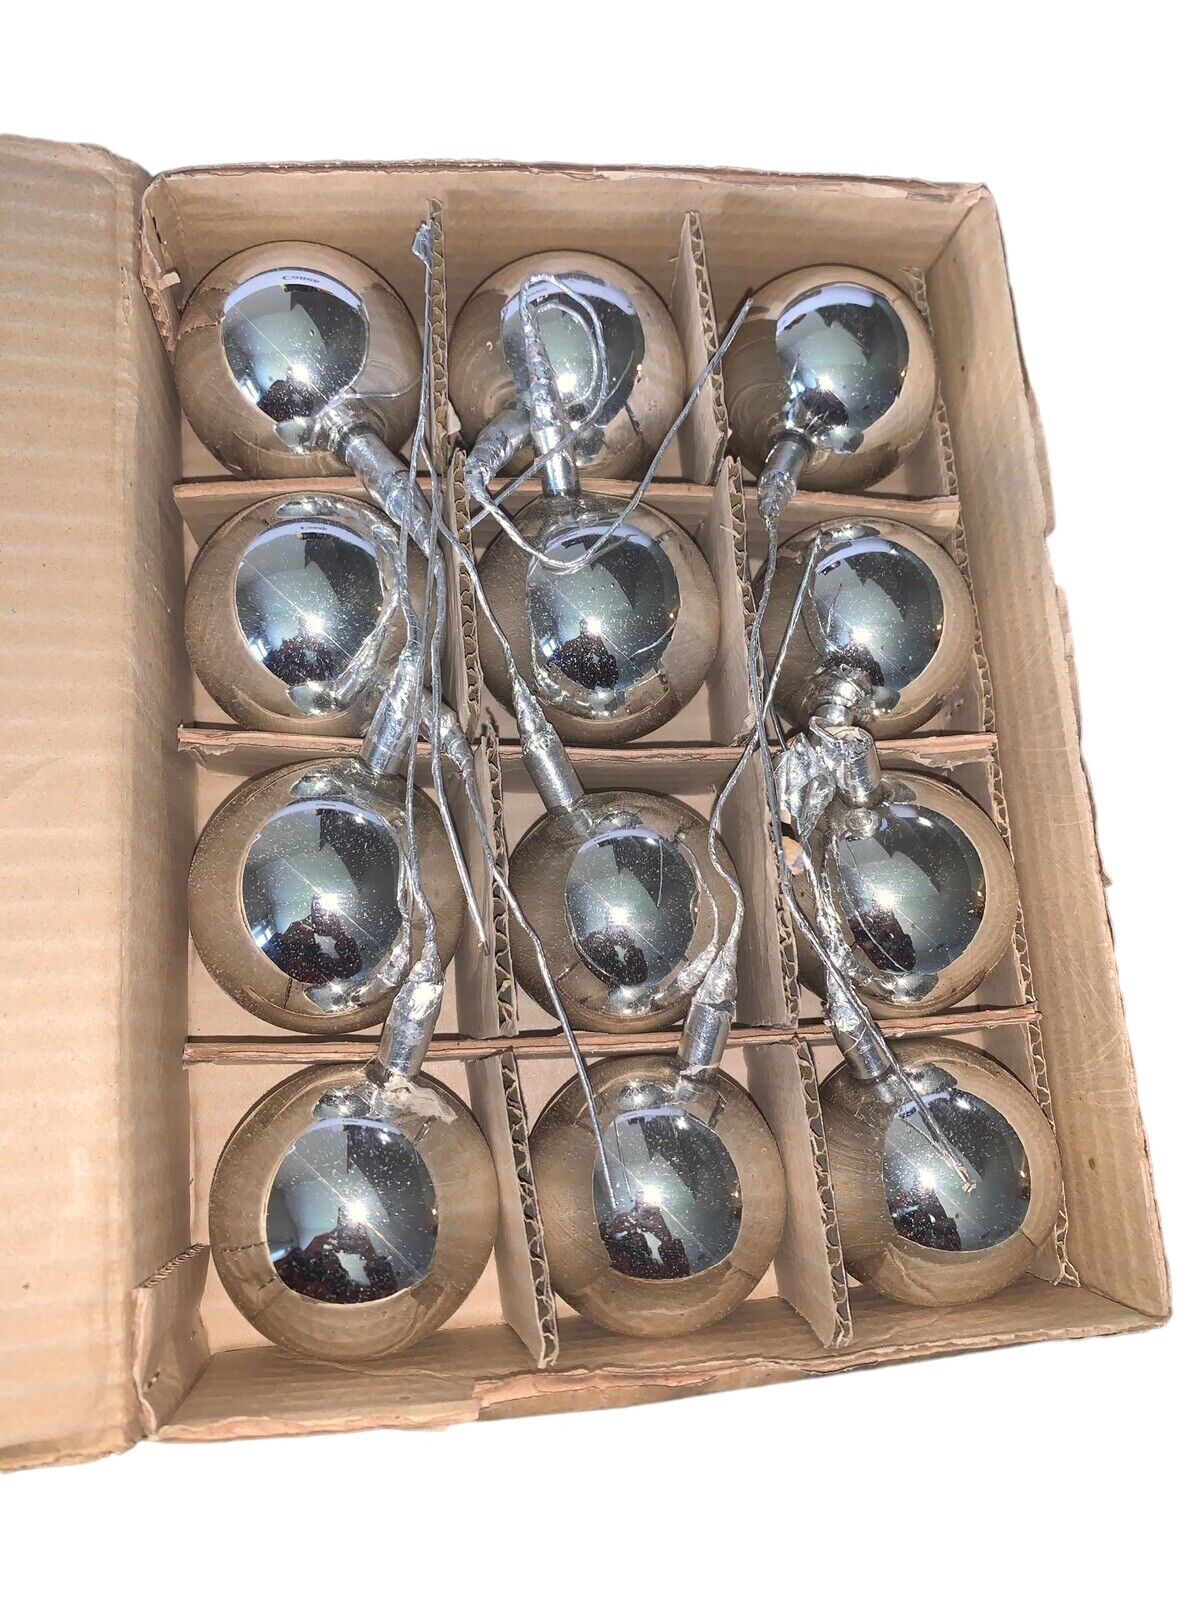 Vintage Christmas Ornaments Box Of 12 Masco Made In Japan Silver Balls Plastic